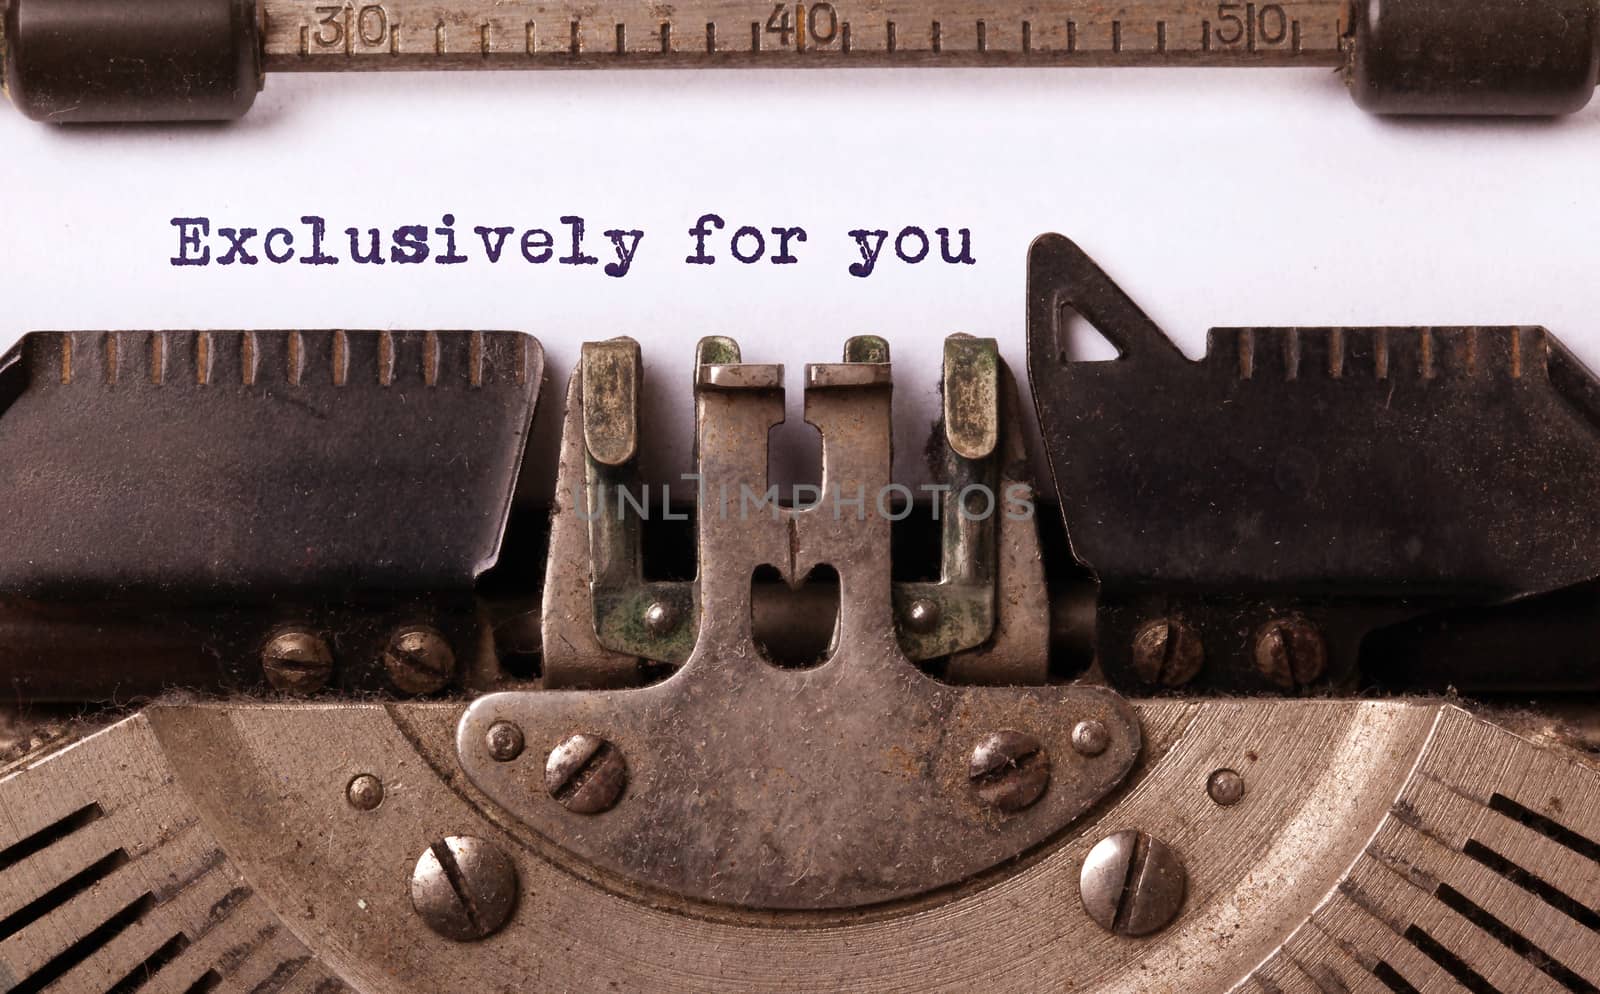 Vintage inscription made by old typewriter, Exclusively for you